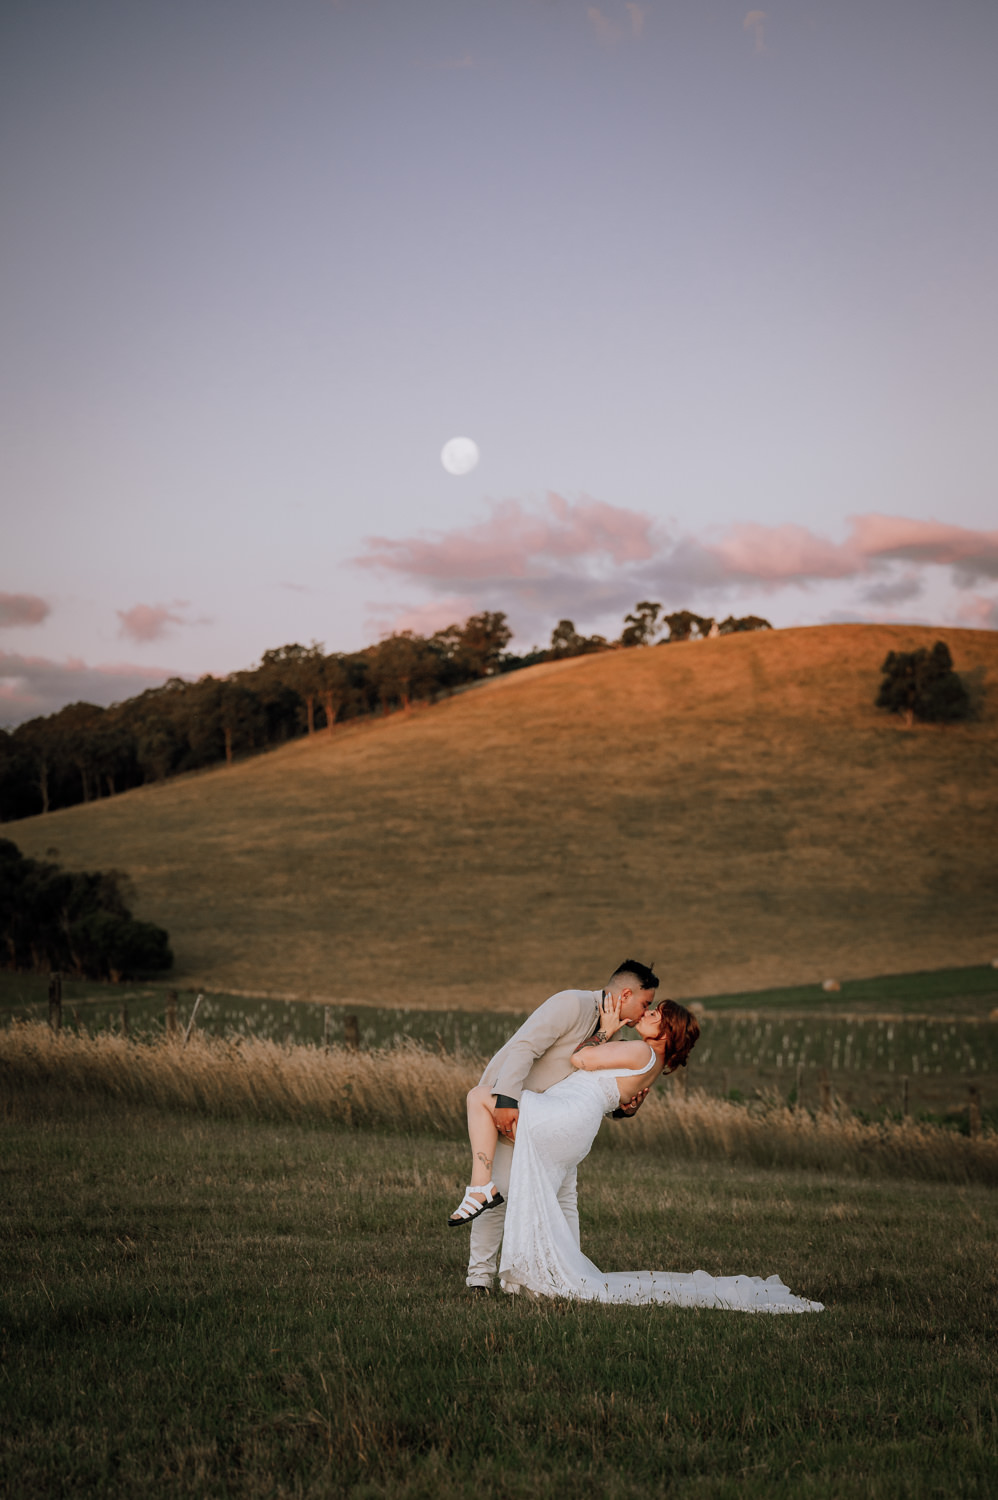 Yarra Valley wedding couple in a dip kiss at sunset while the moon rises over the hill behind them